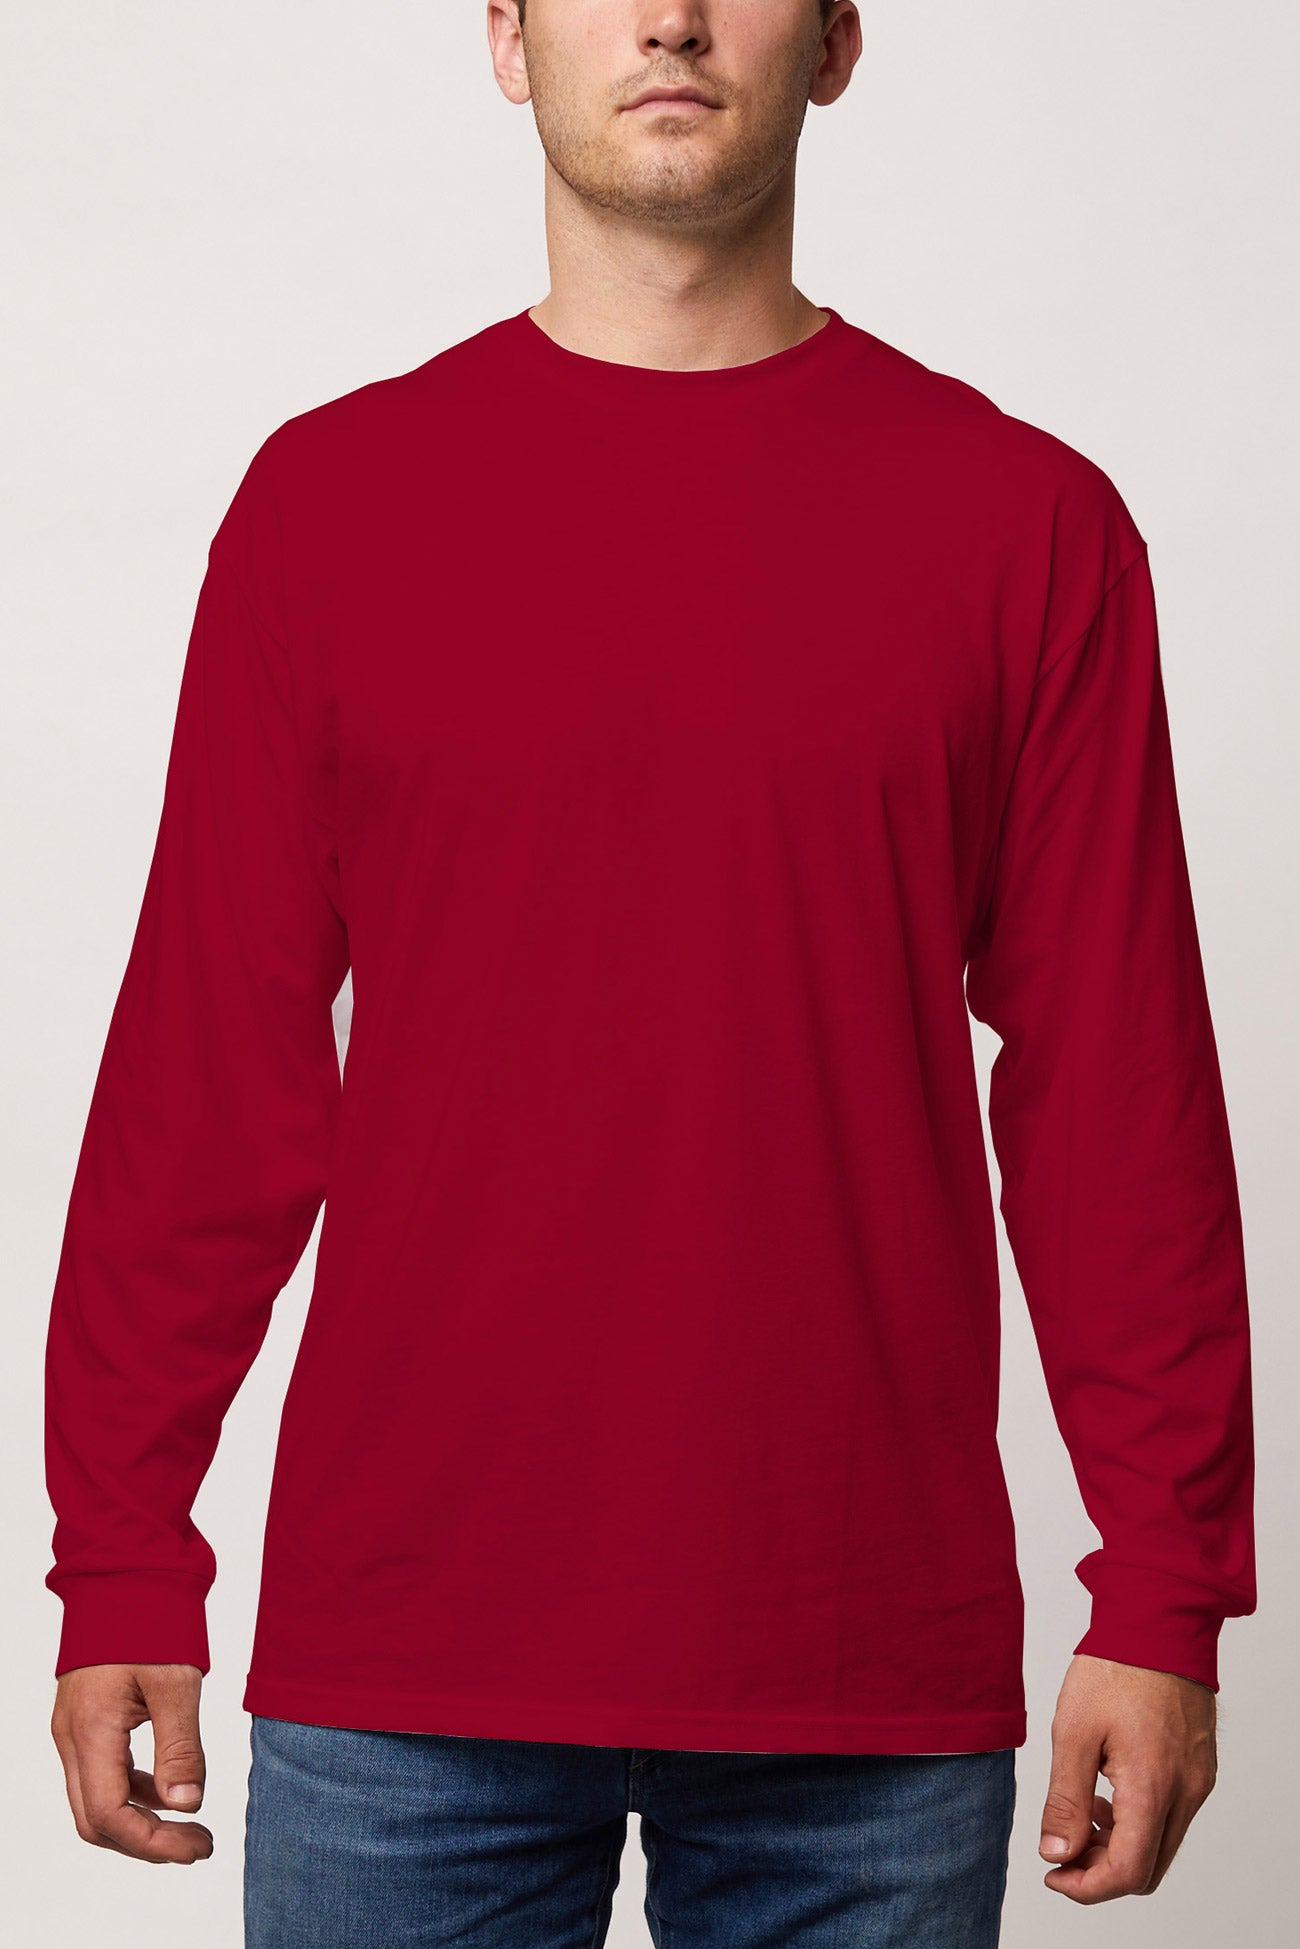 #SM4150LS Recycled - Long Sleeve Crew - Mens